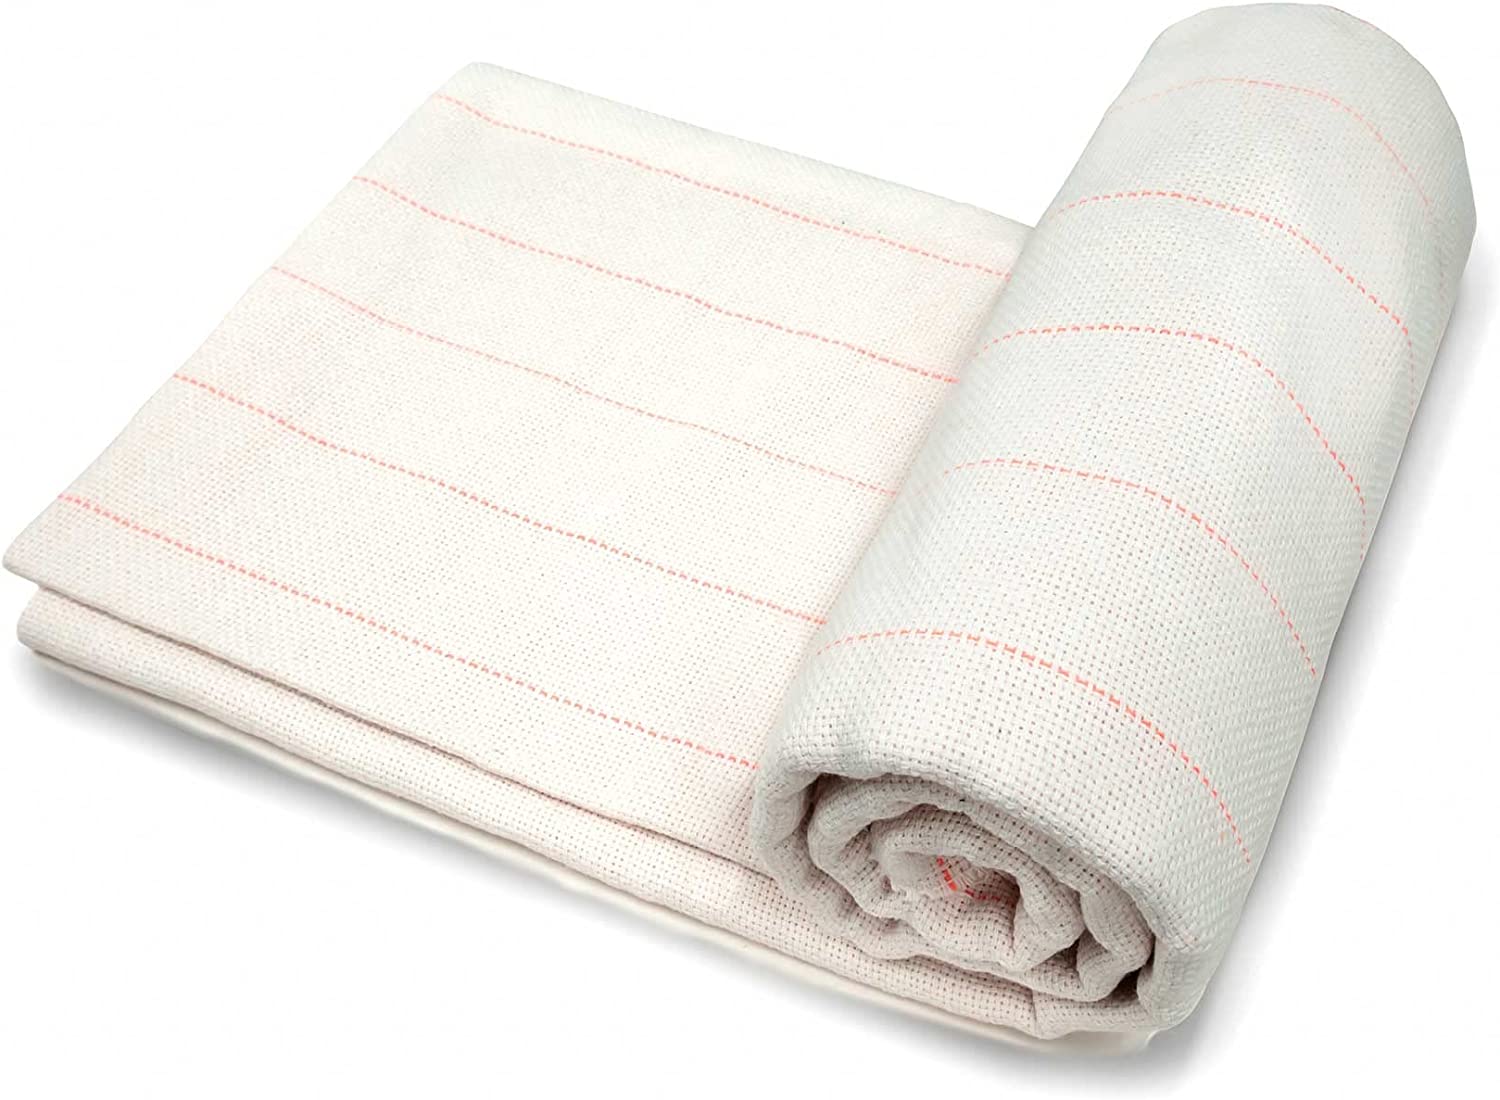  80*59 Primary Tufting Cloth with Marked Lines